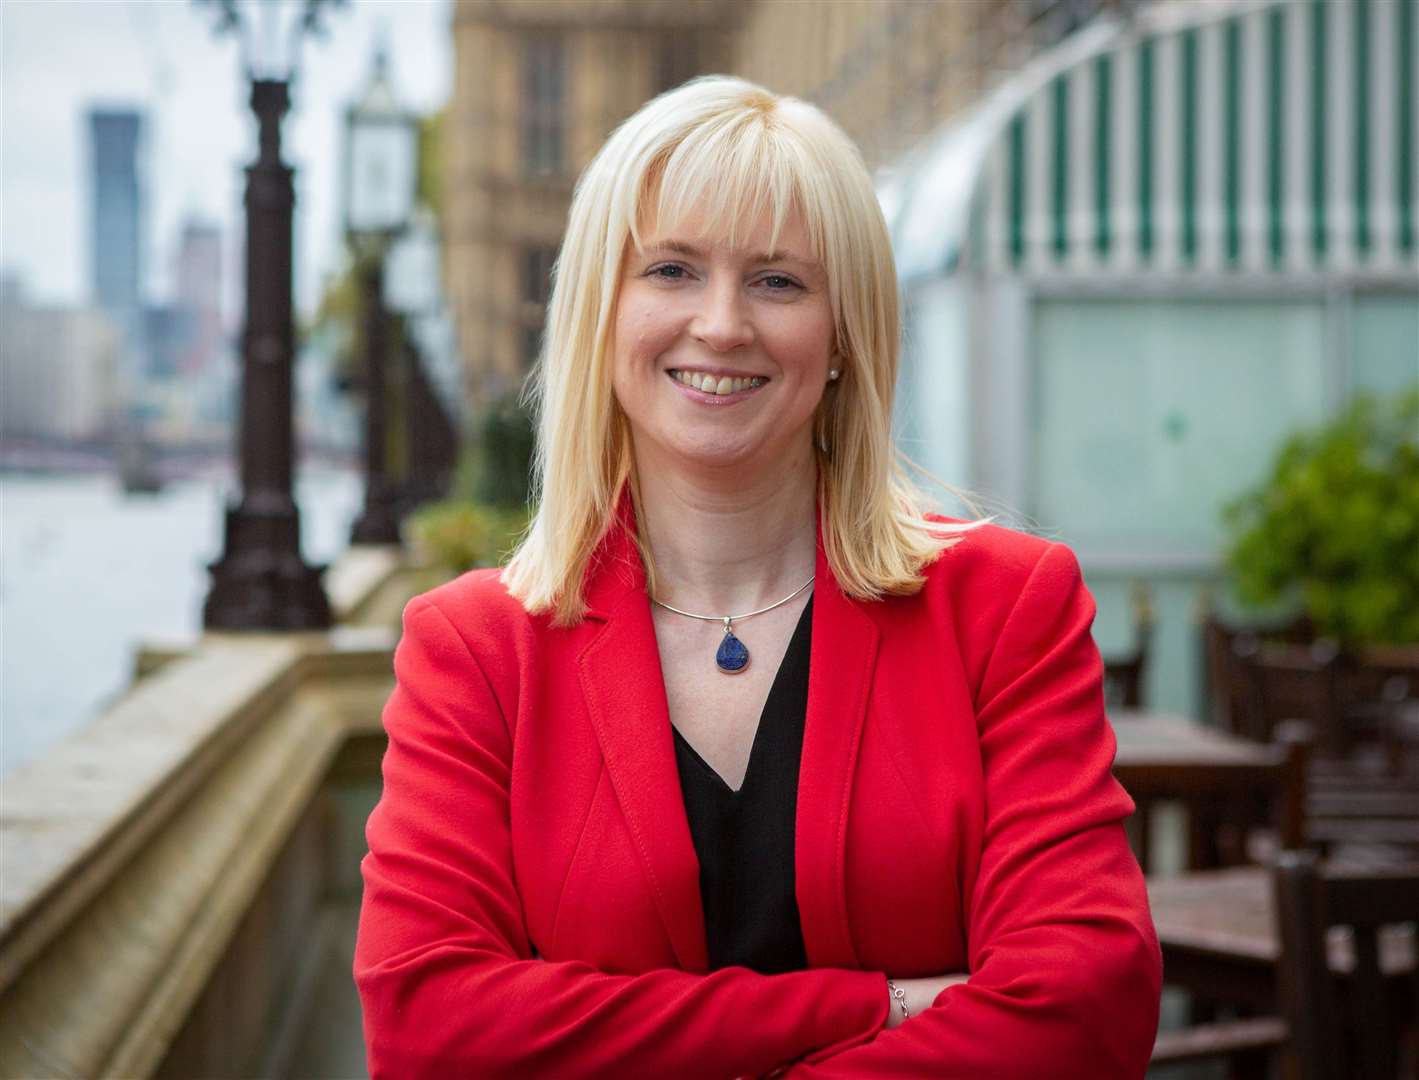 Labour MP Rosie Duffield is facing a tough battle to retain her seat